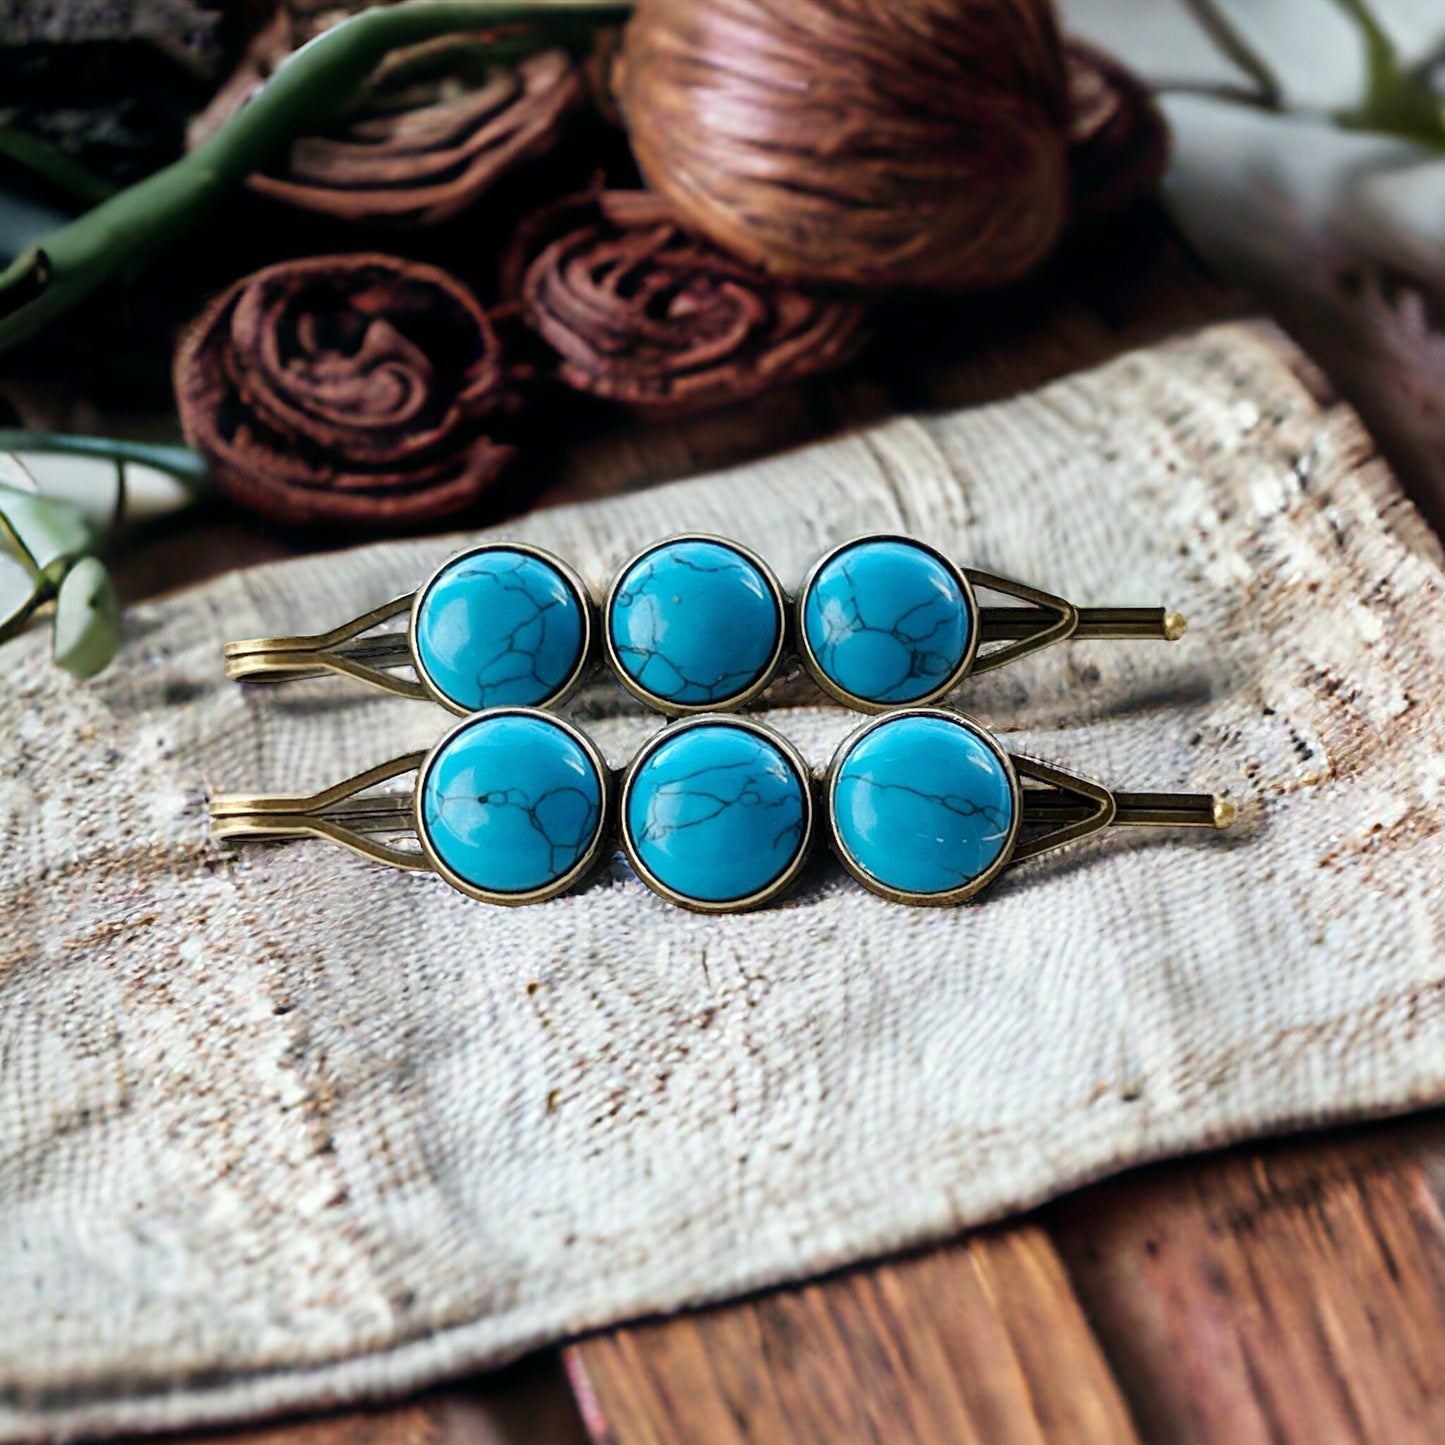 Blue Stone Hair Pins - Western, Boho, & Country-Inspired Hair Accessories